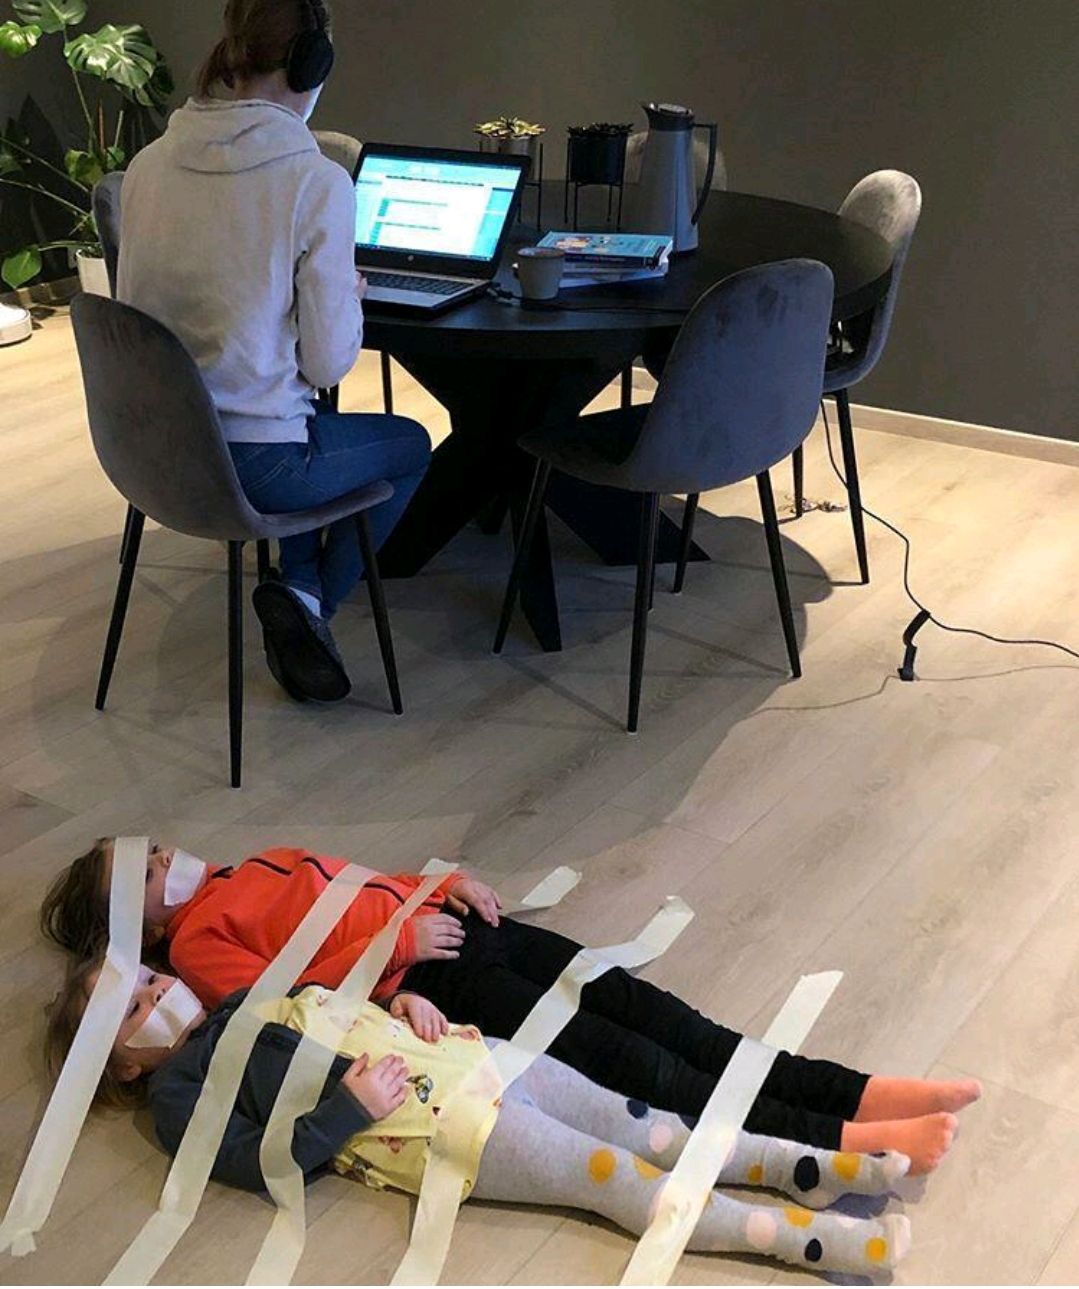 Working from home as a parent...